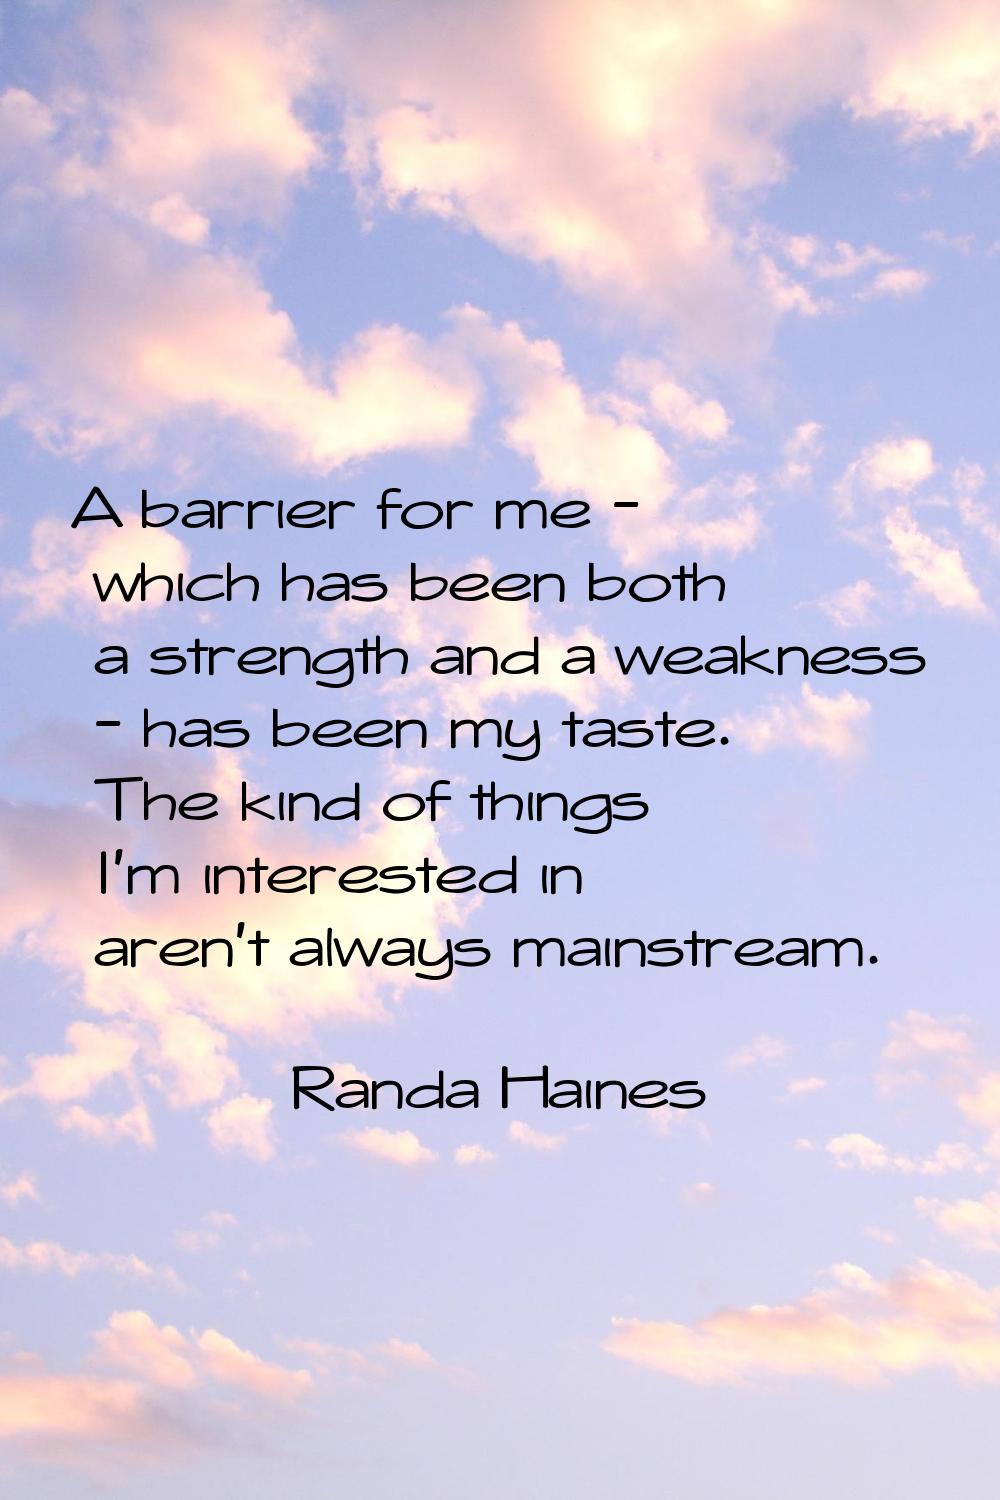 A barrier for me - which has been both a strength and a weakness - has been my taste. The kind of t